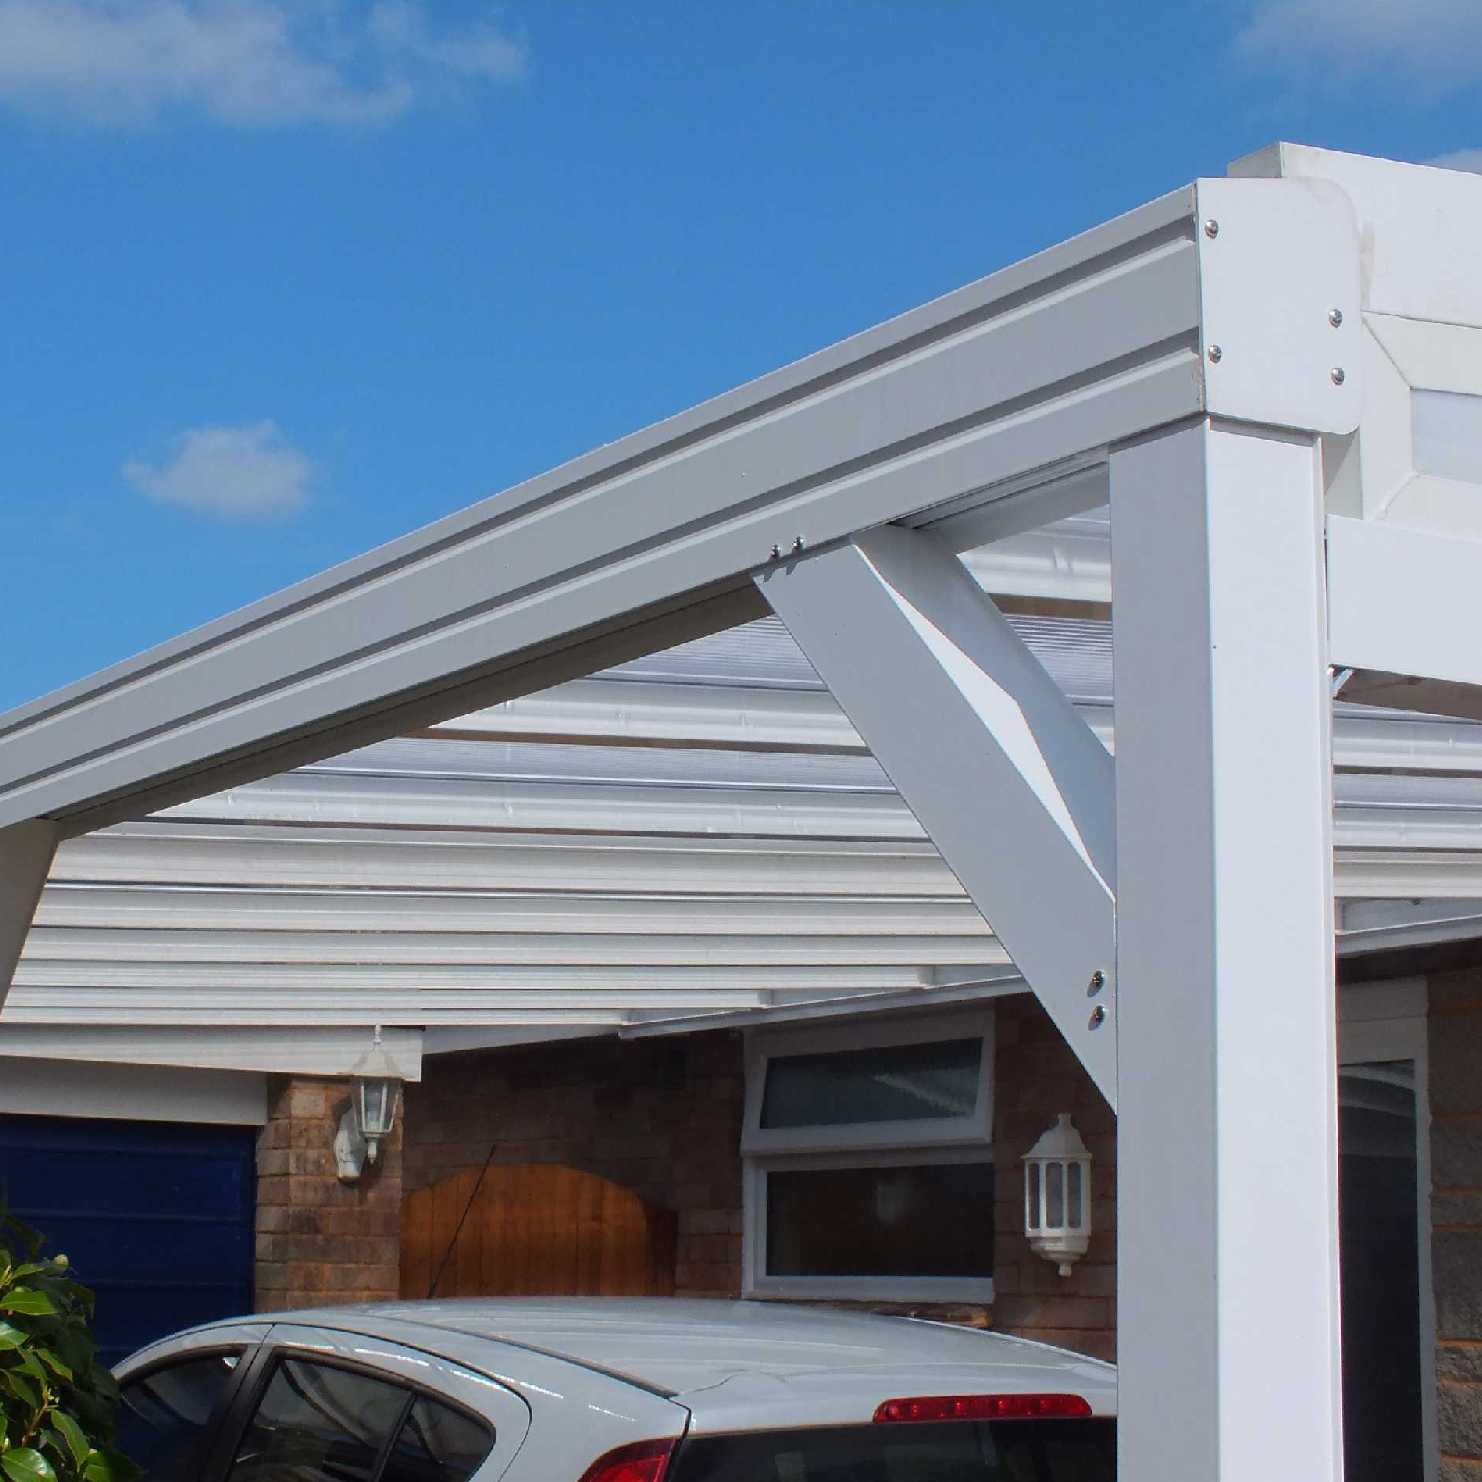 Great deals on Omega Smart Lean-To Canopy, White with 16mm Polycarbonate Glazing - 6.3m (W) x 2.0m (P), (4) Supporting Posts